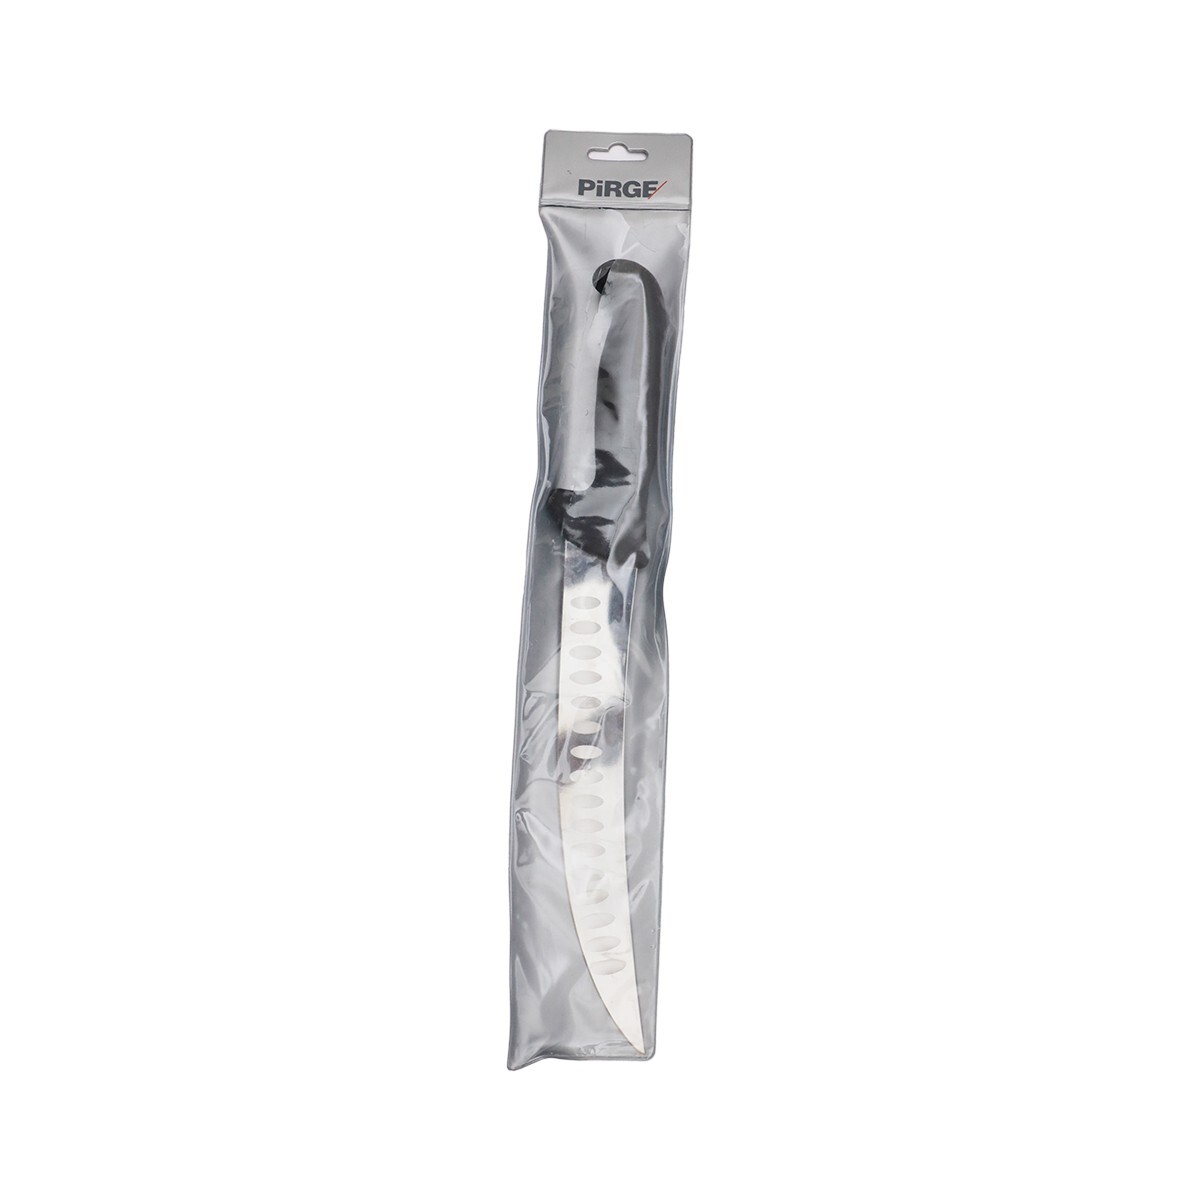 Pirge Buther Knife 39622 26cm